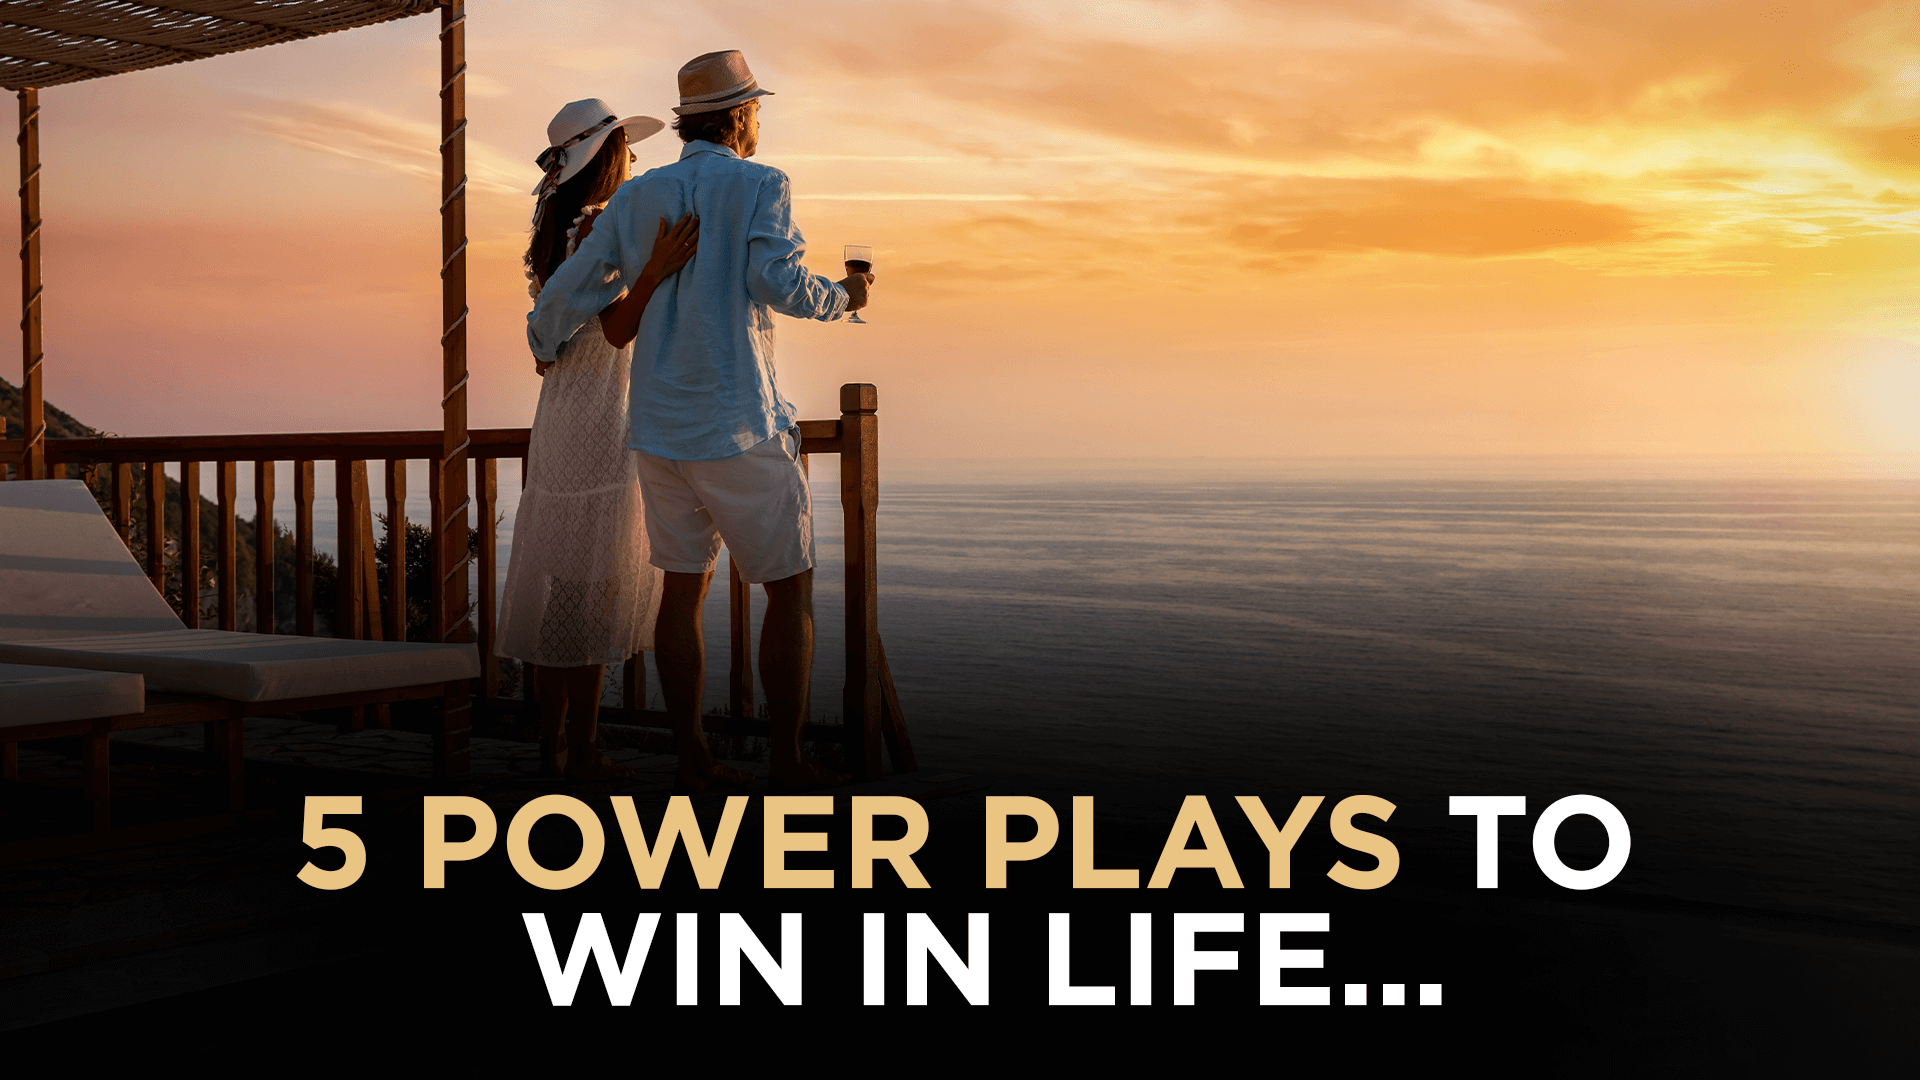 5 power plays to WIN in life